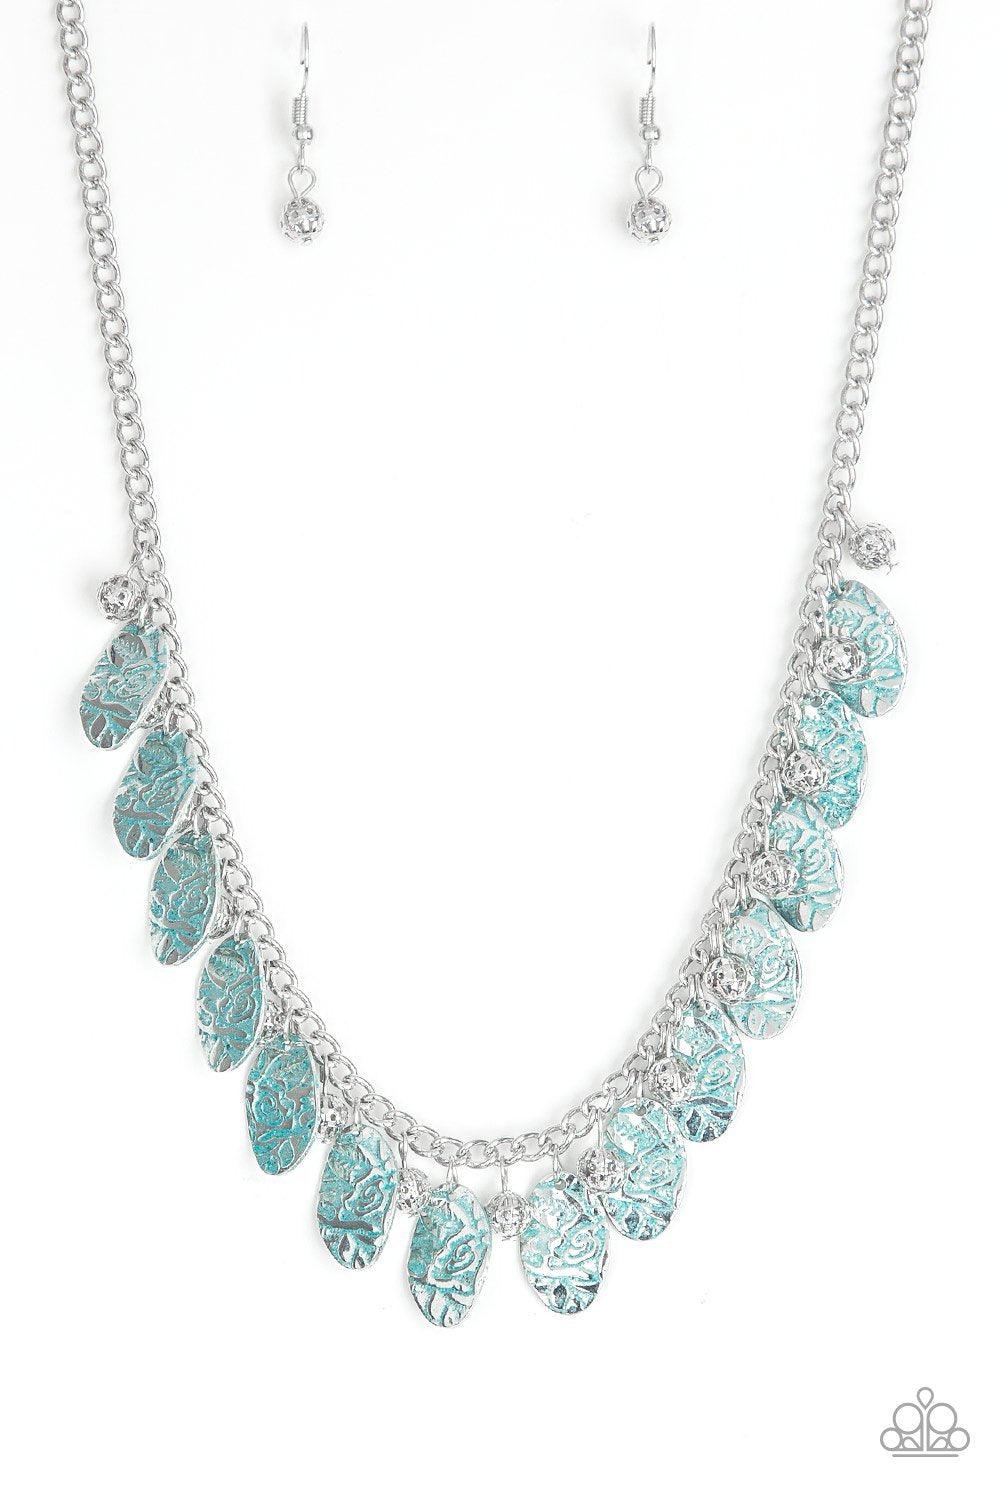 Vintage Gardens Blue and Silver Necklace - Paparazzi Accessories- lightbox - CarasShop.com - $5 Jewelry by Cara Jewels